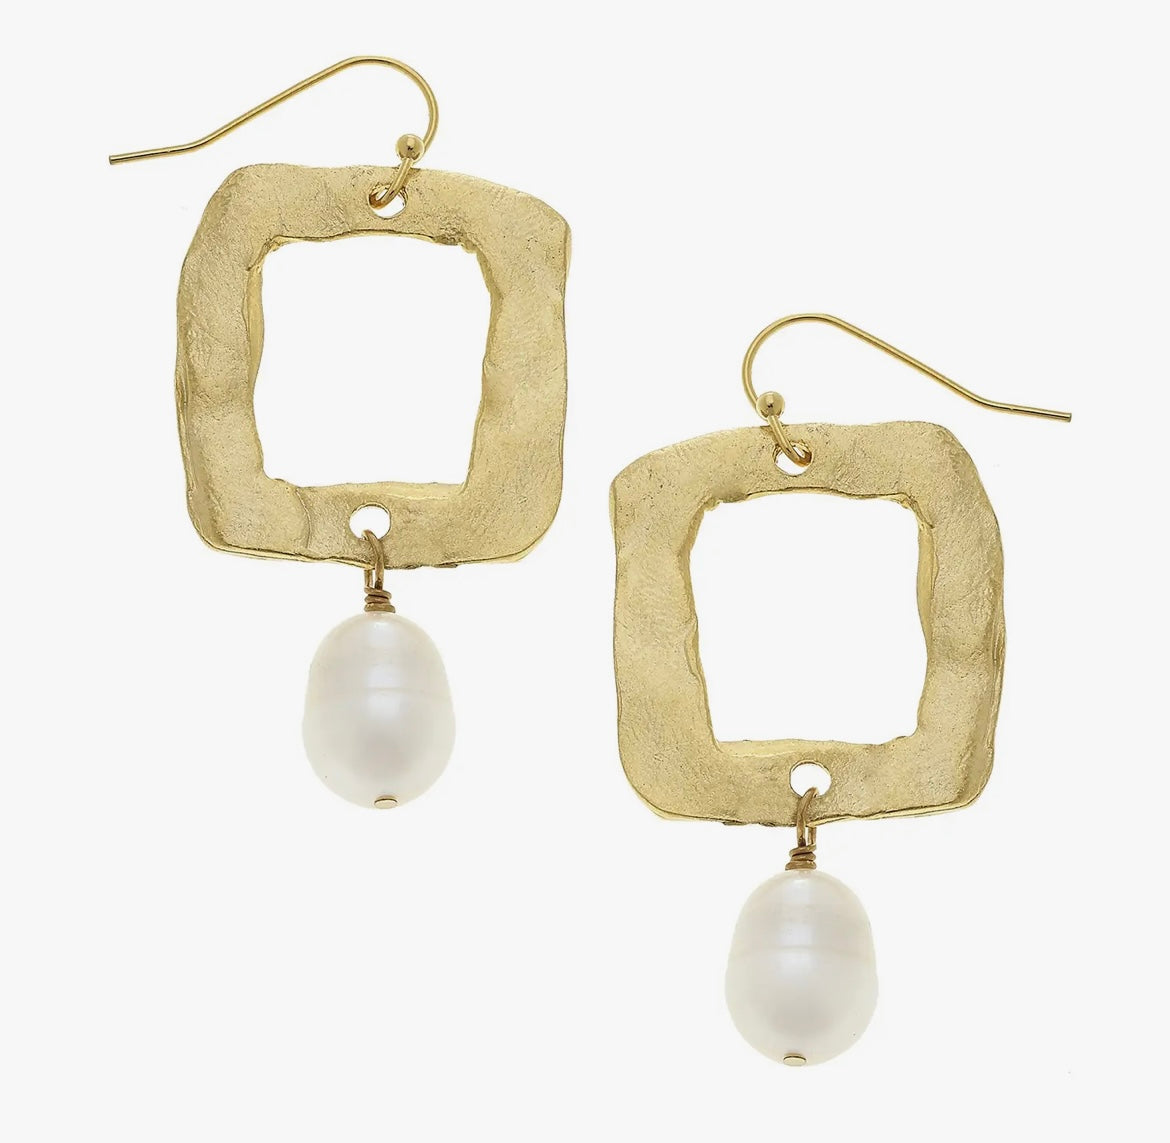 Gold Open Square and Genuine Freshwater Pearl Earrings